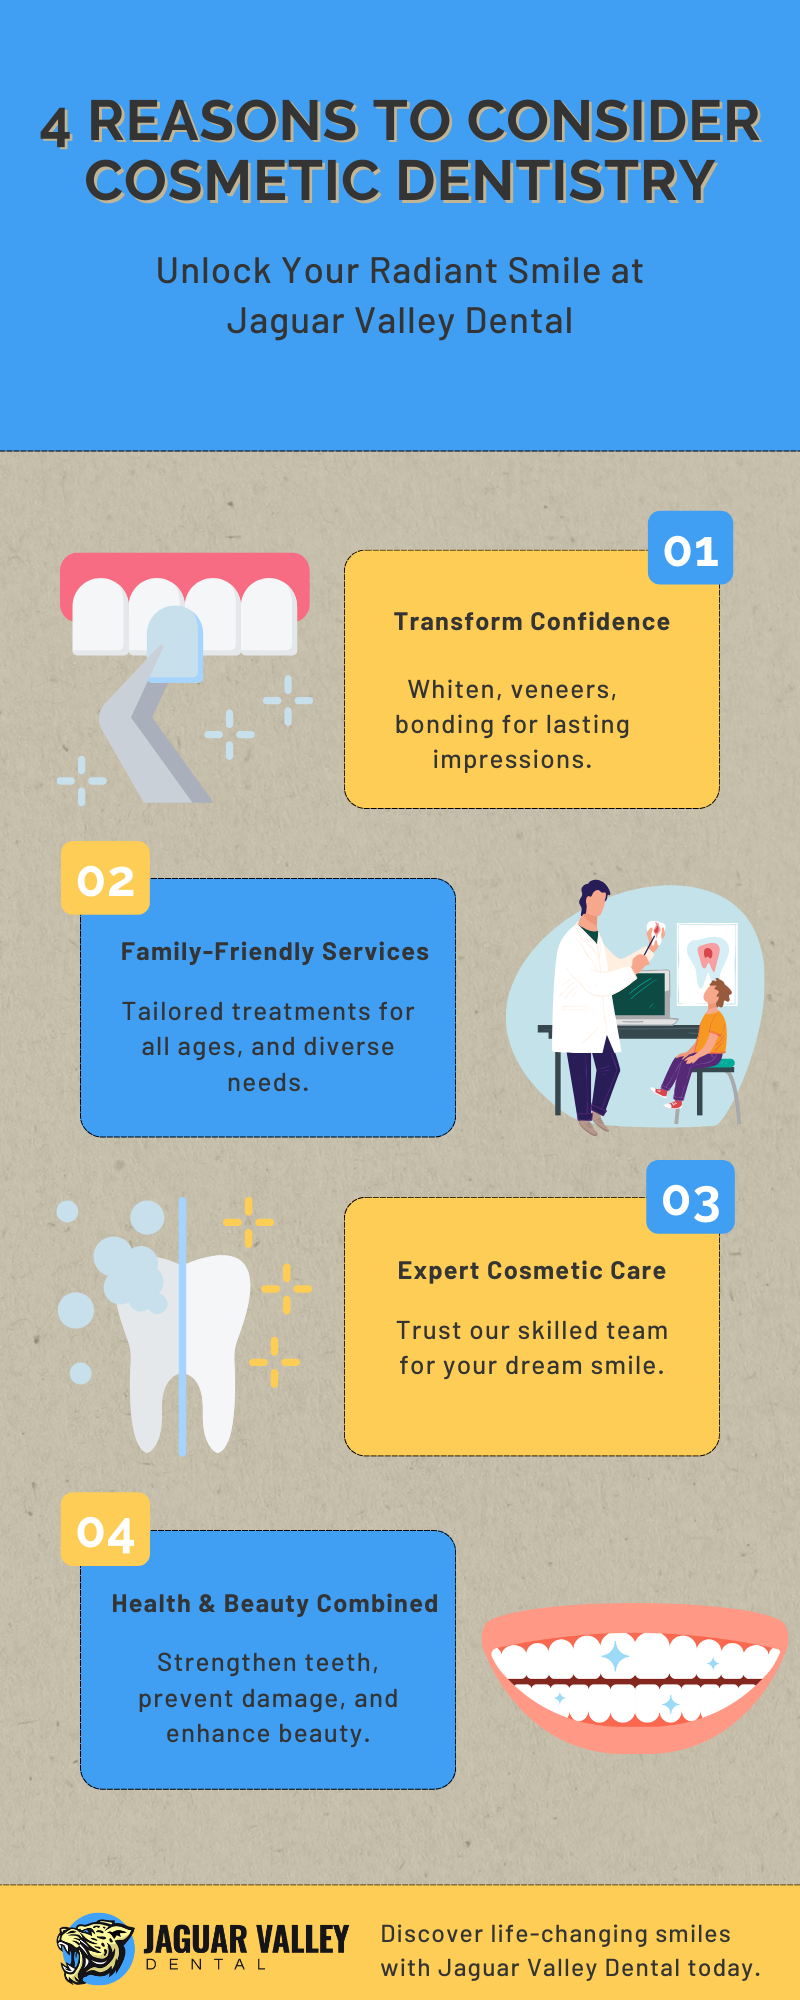 M37056 - Infographic - 4 Reasons to Consider Cosmetic Dentistry.png